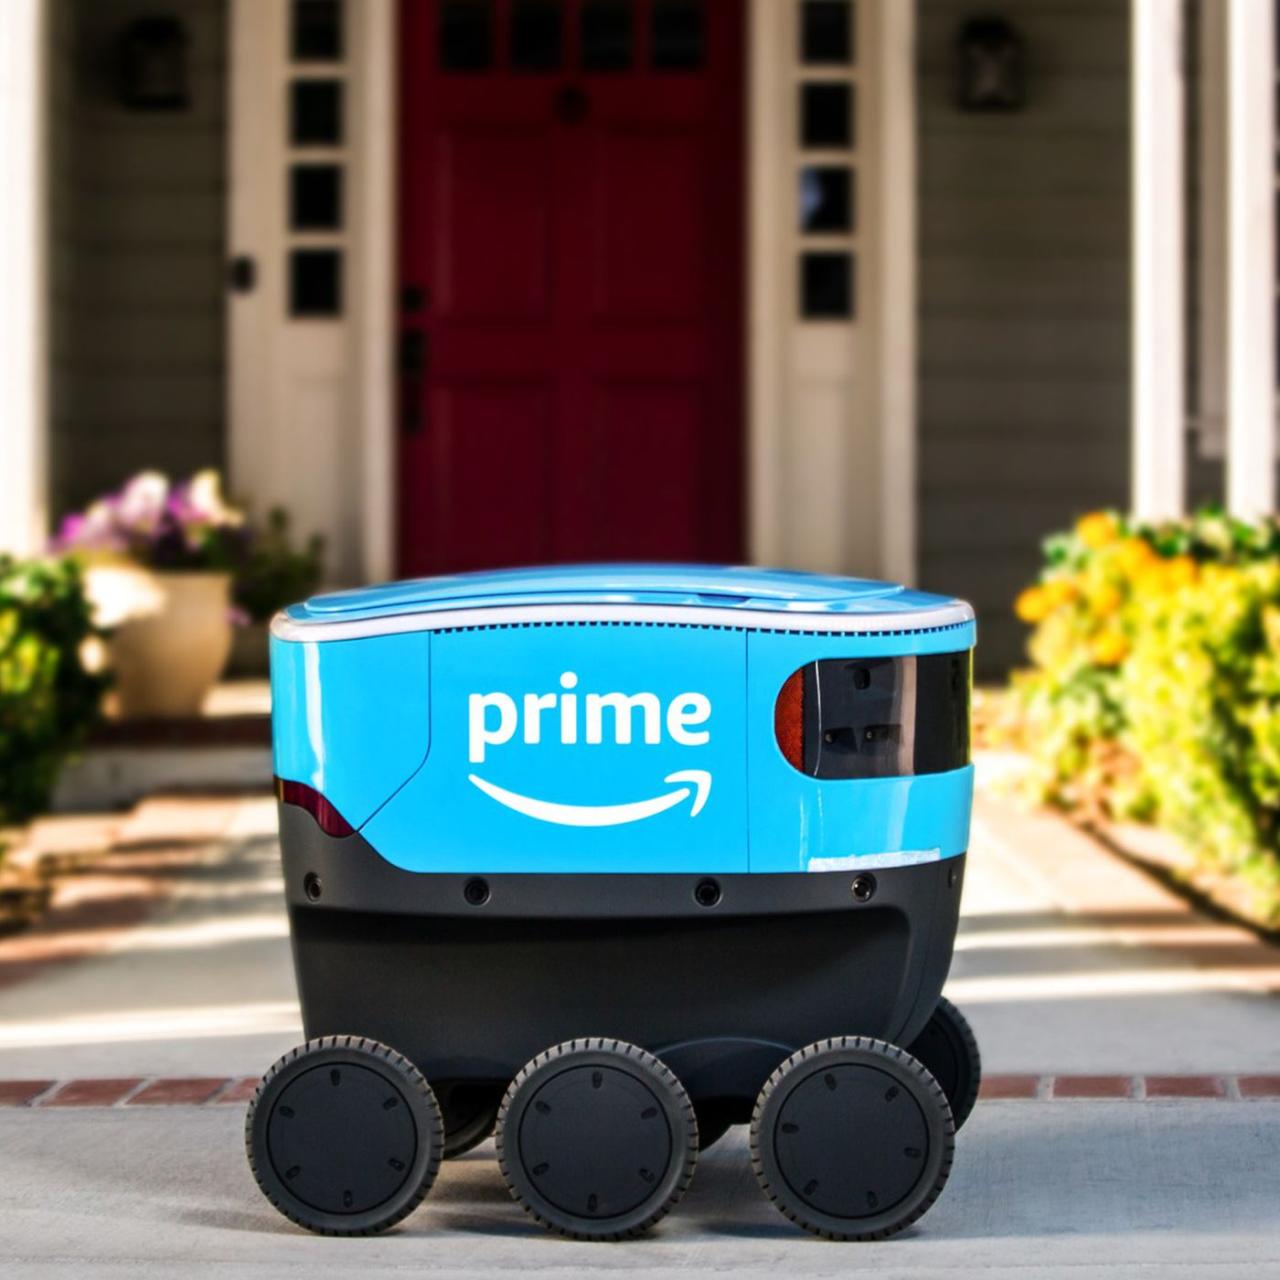 This is how Amazon is training its Scout delivery robots - The Verge